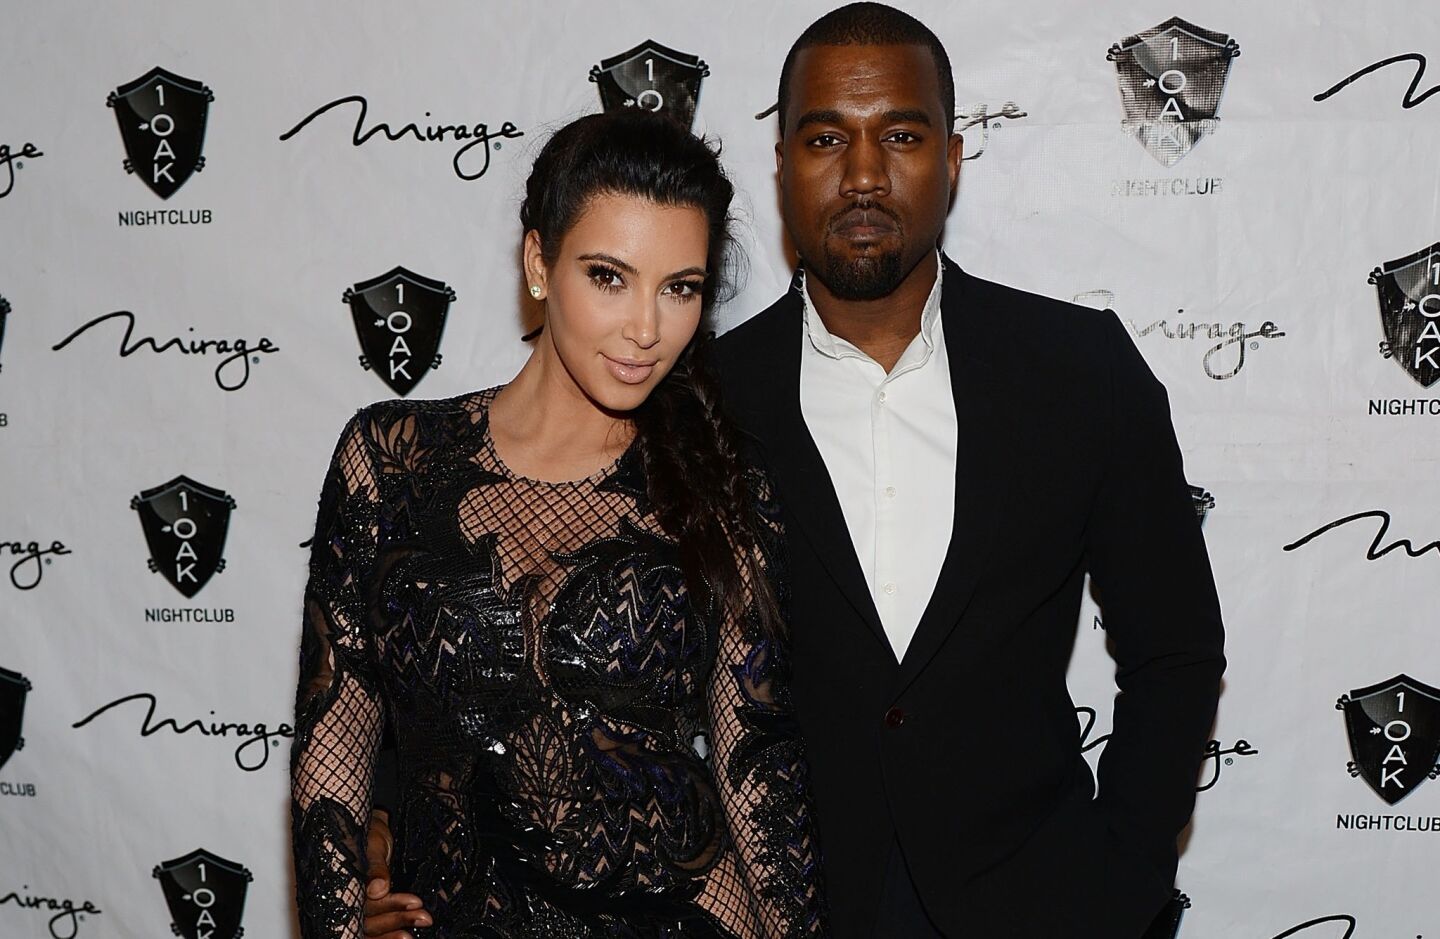 After fertility struggles, reality TV starlet Kim Kardashian announced she is expecting baby No. 2 with husband Kanye West. The Internet agreed that the name of their second child, whether it's a boy or girl, should be "South." That way, the couple's daughter North would have a matching pair.